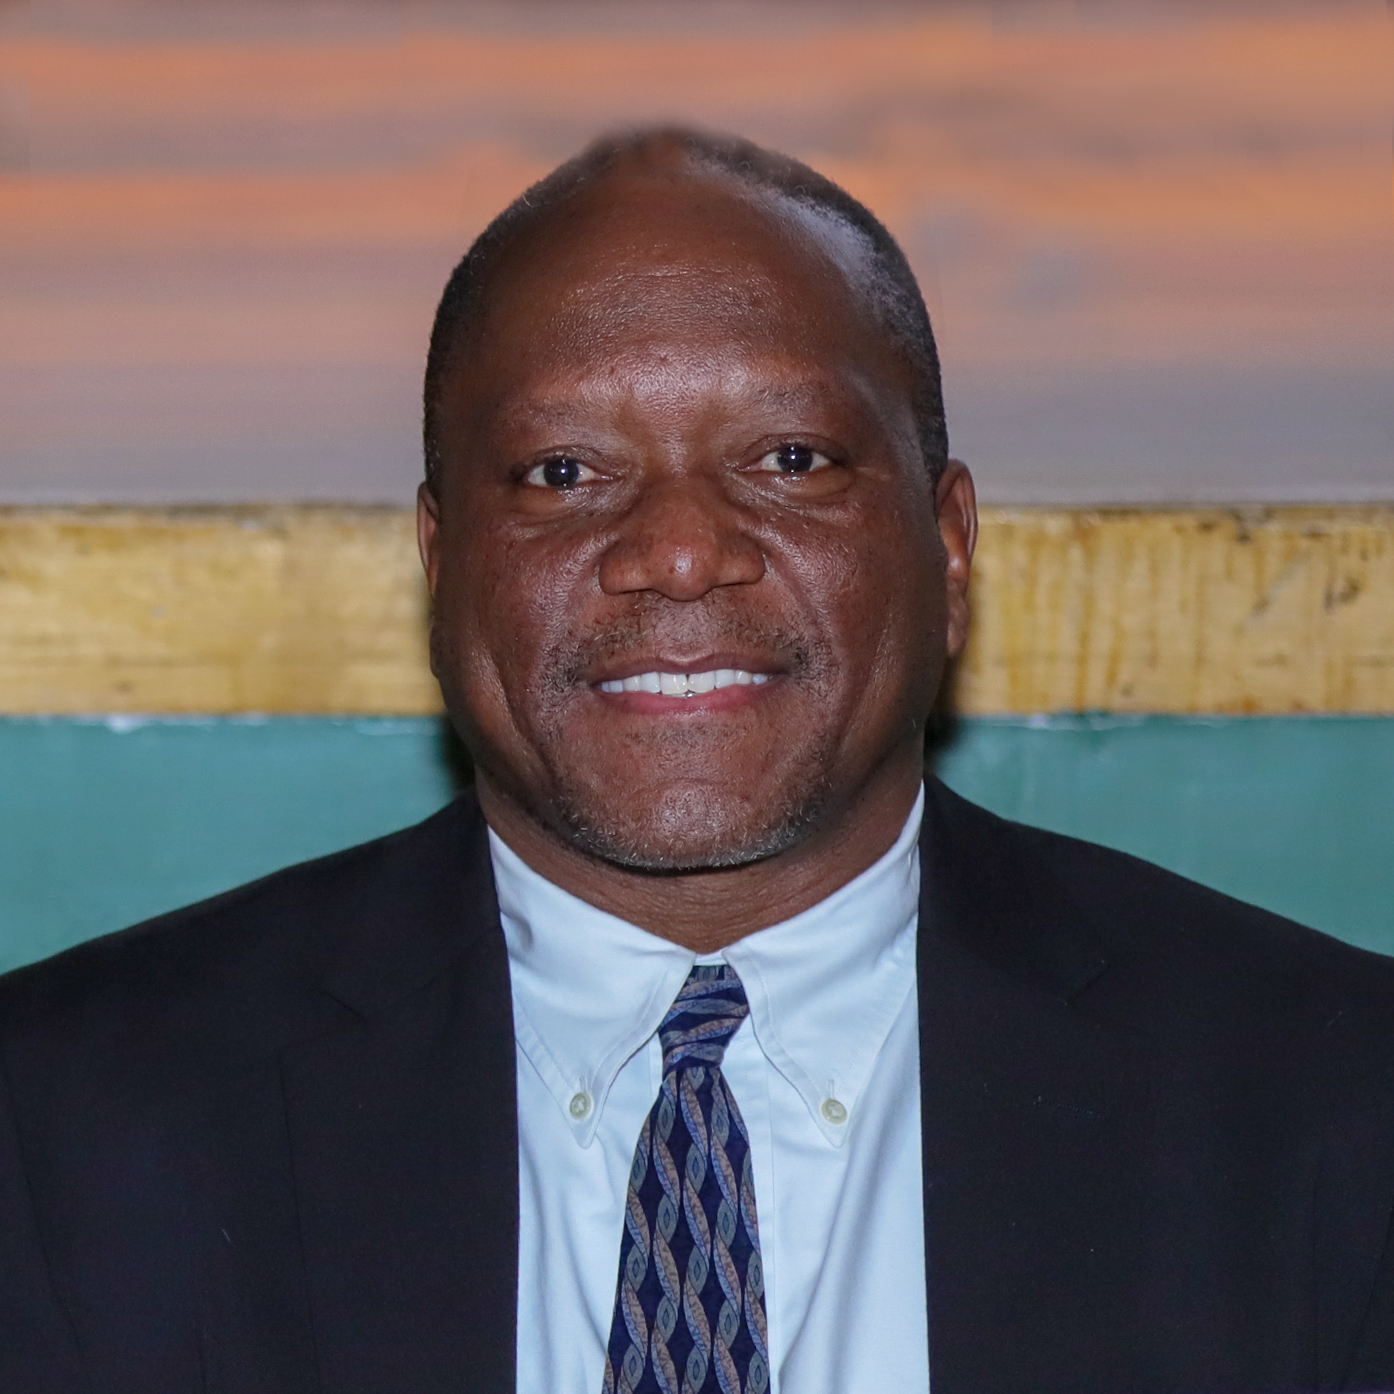 Khumalo lauds Watertown in public forum for city manager position